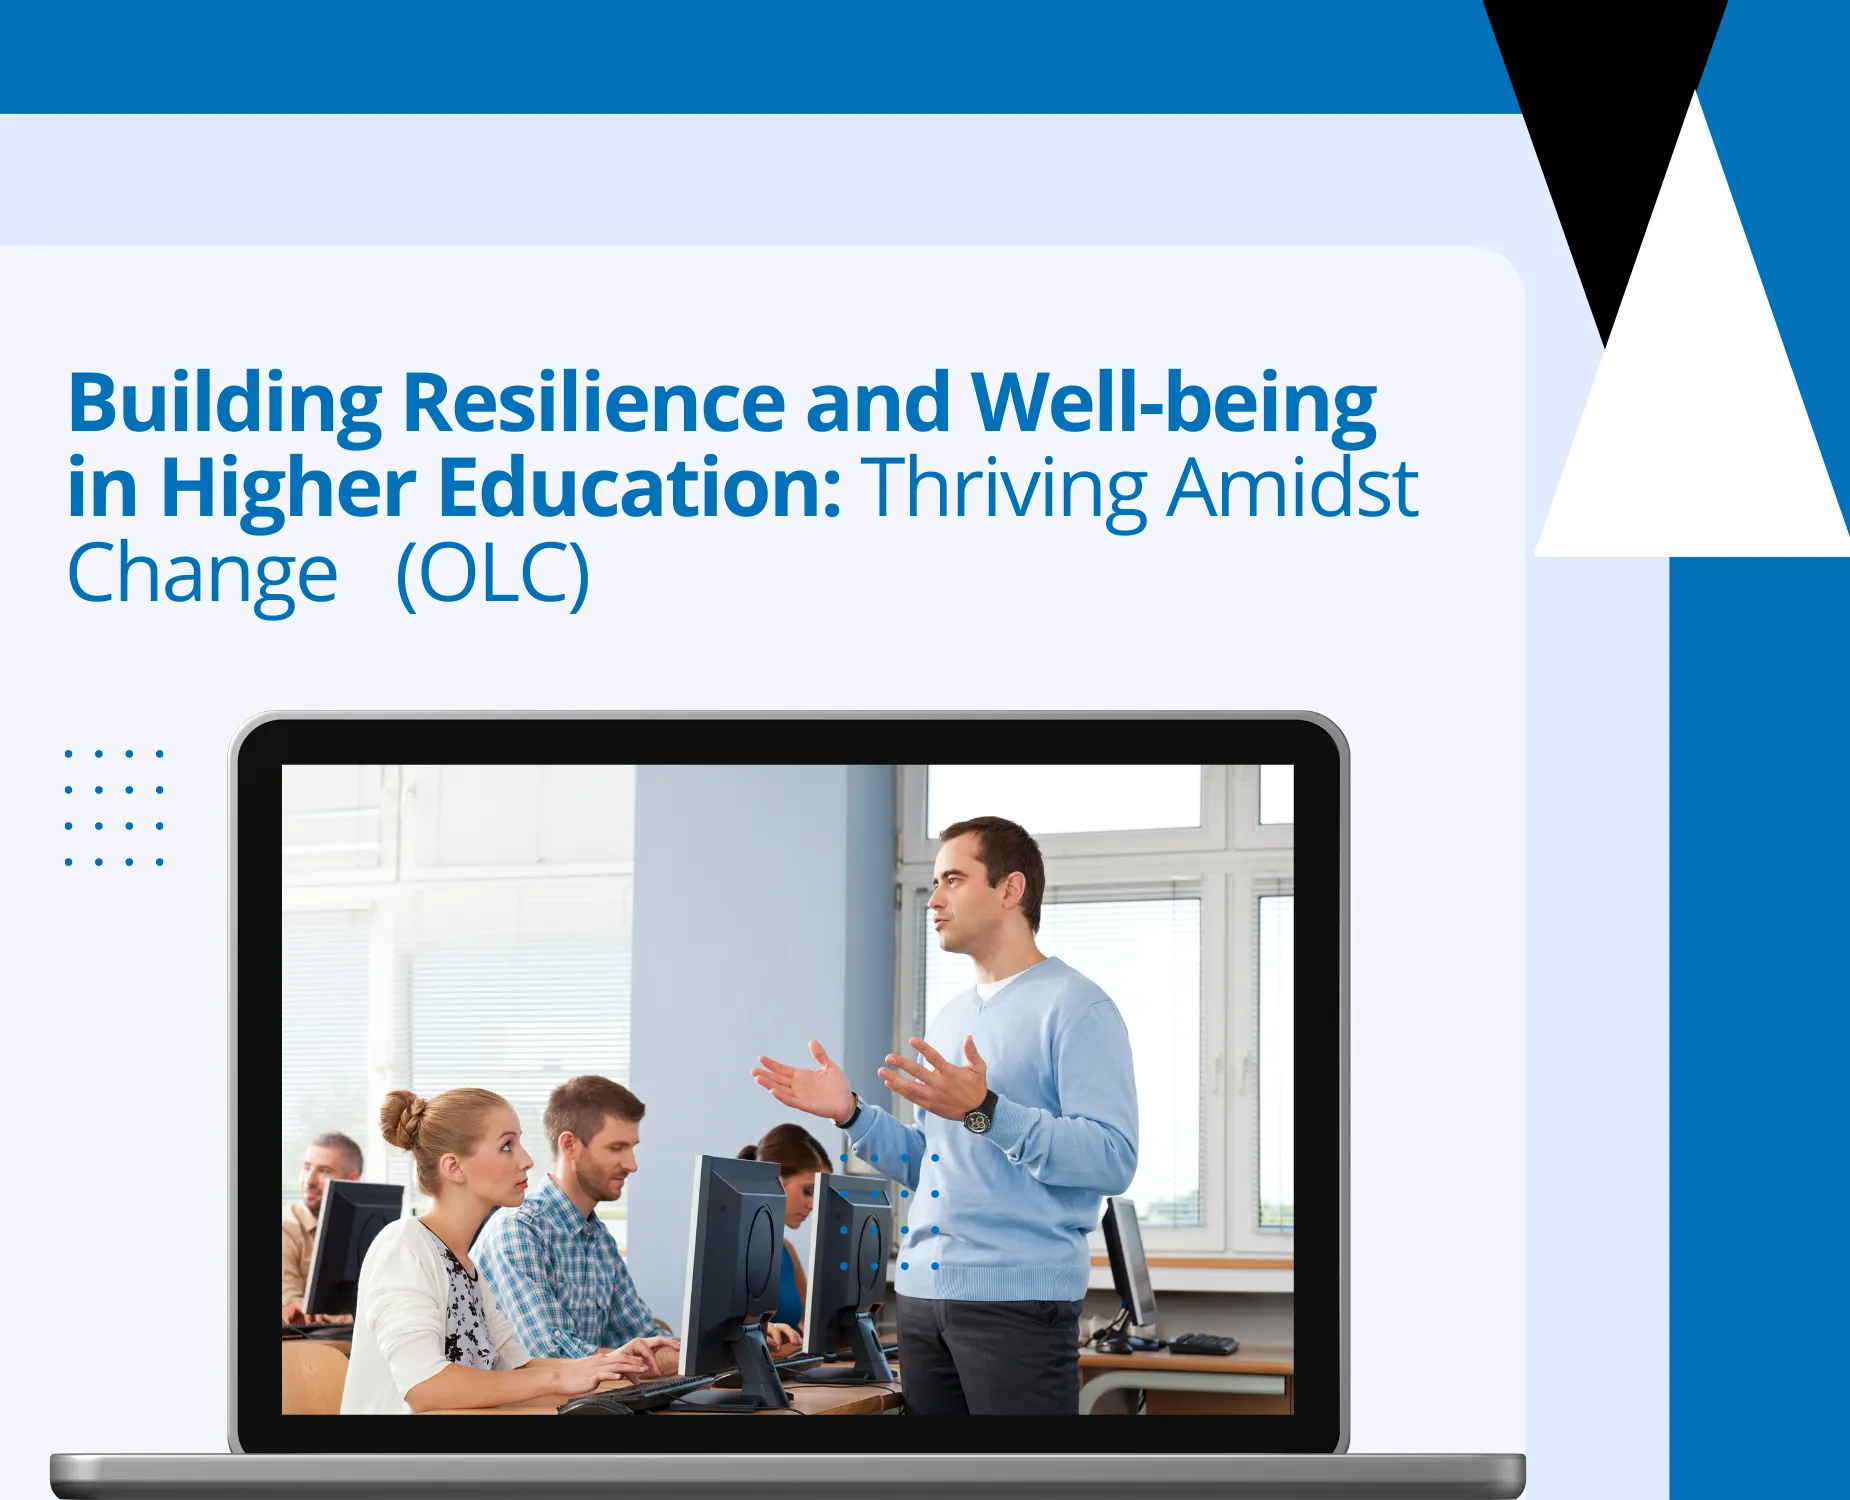 Building Resilience and Well-being in Higher Education: Thriving Amidst Change (OLC)